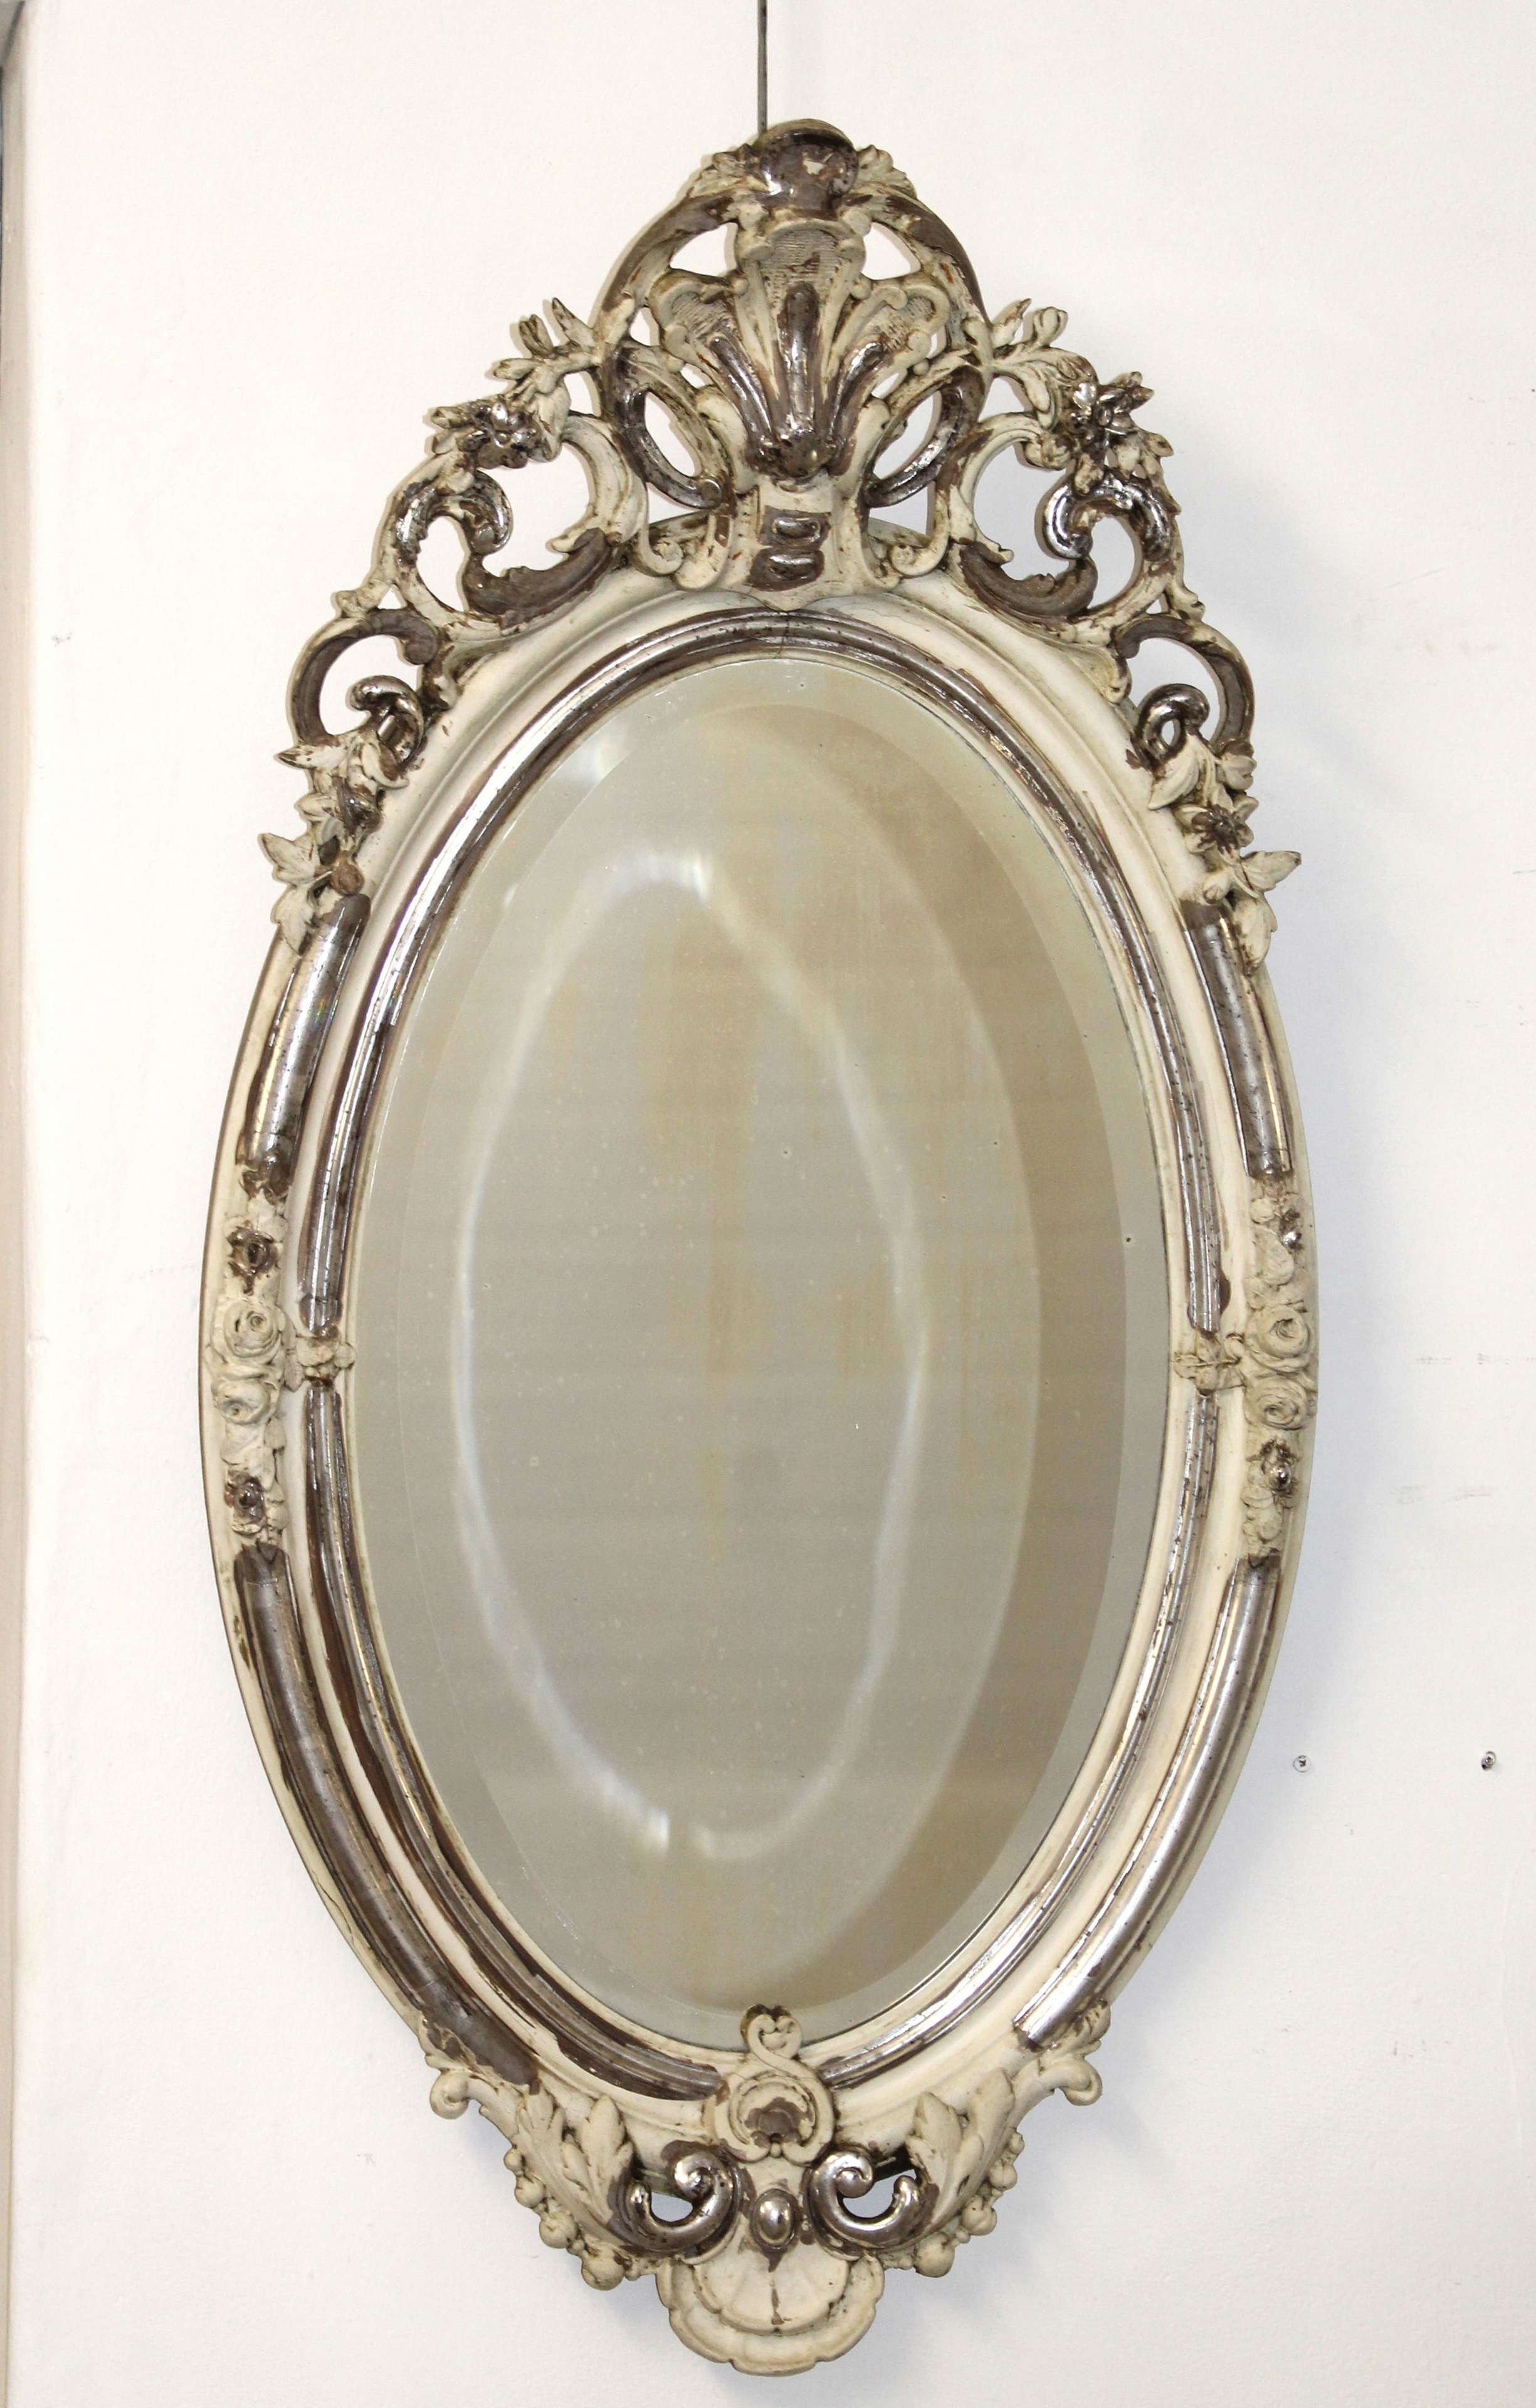 Cream Oval Mirror In Antique French Mirrors, French Oval Mirror Antique Silver